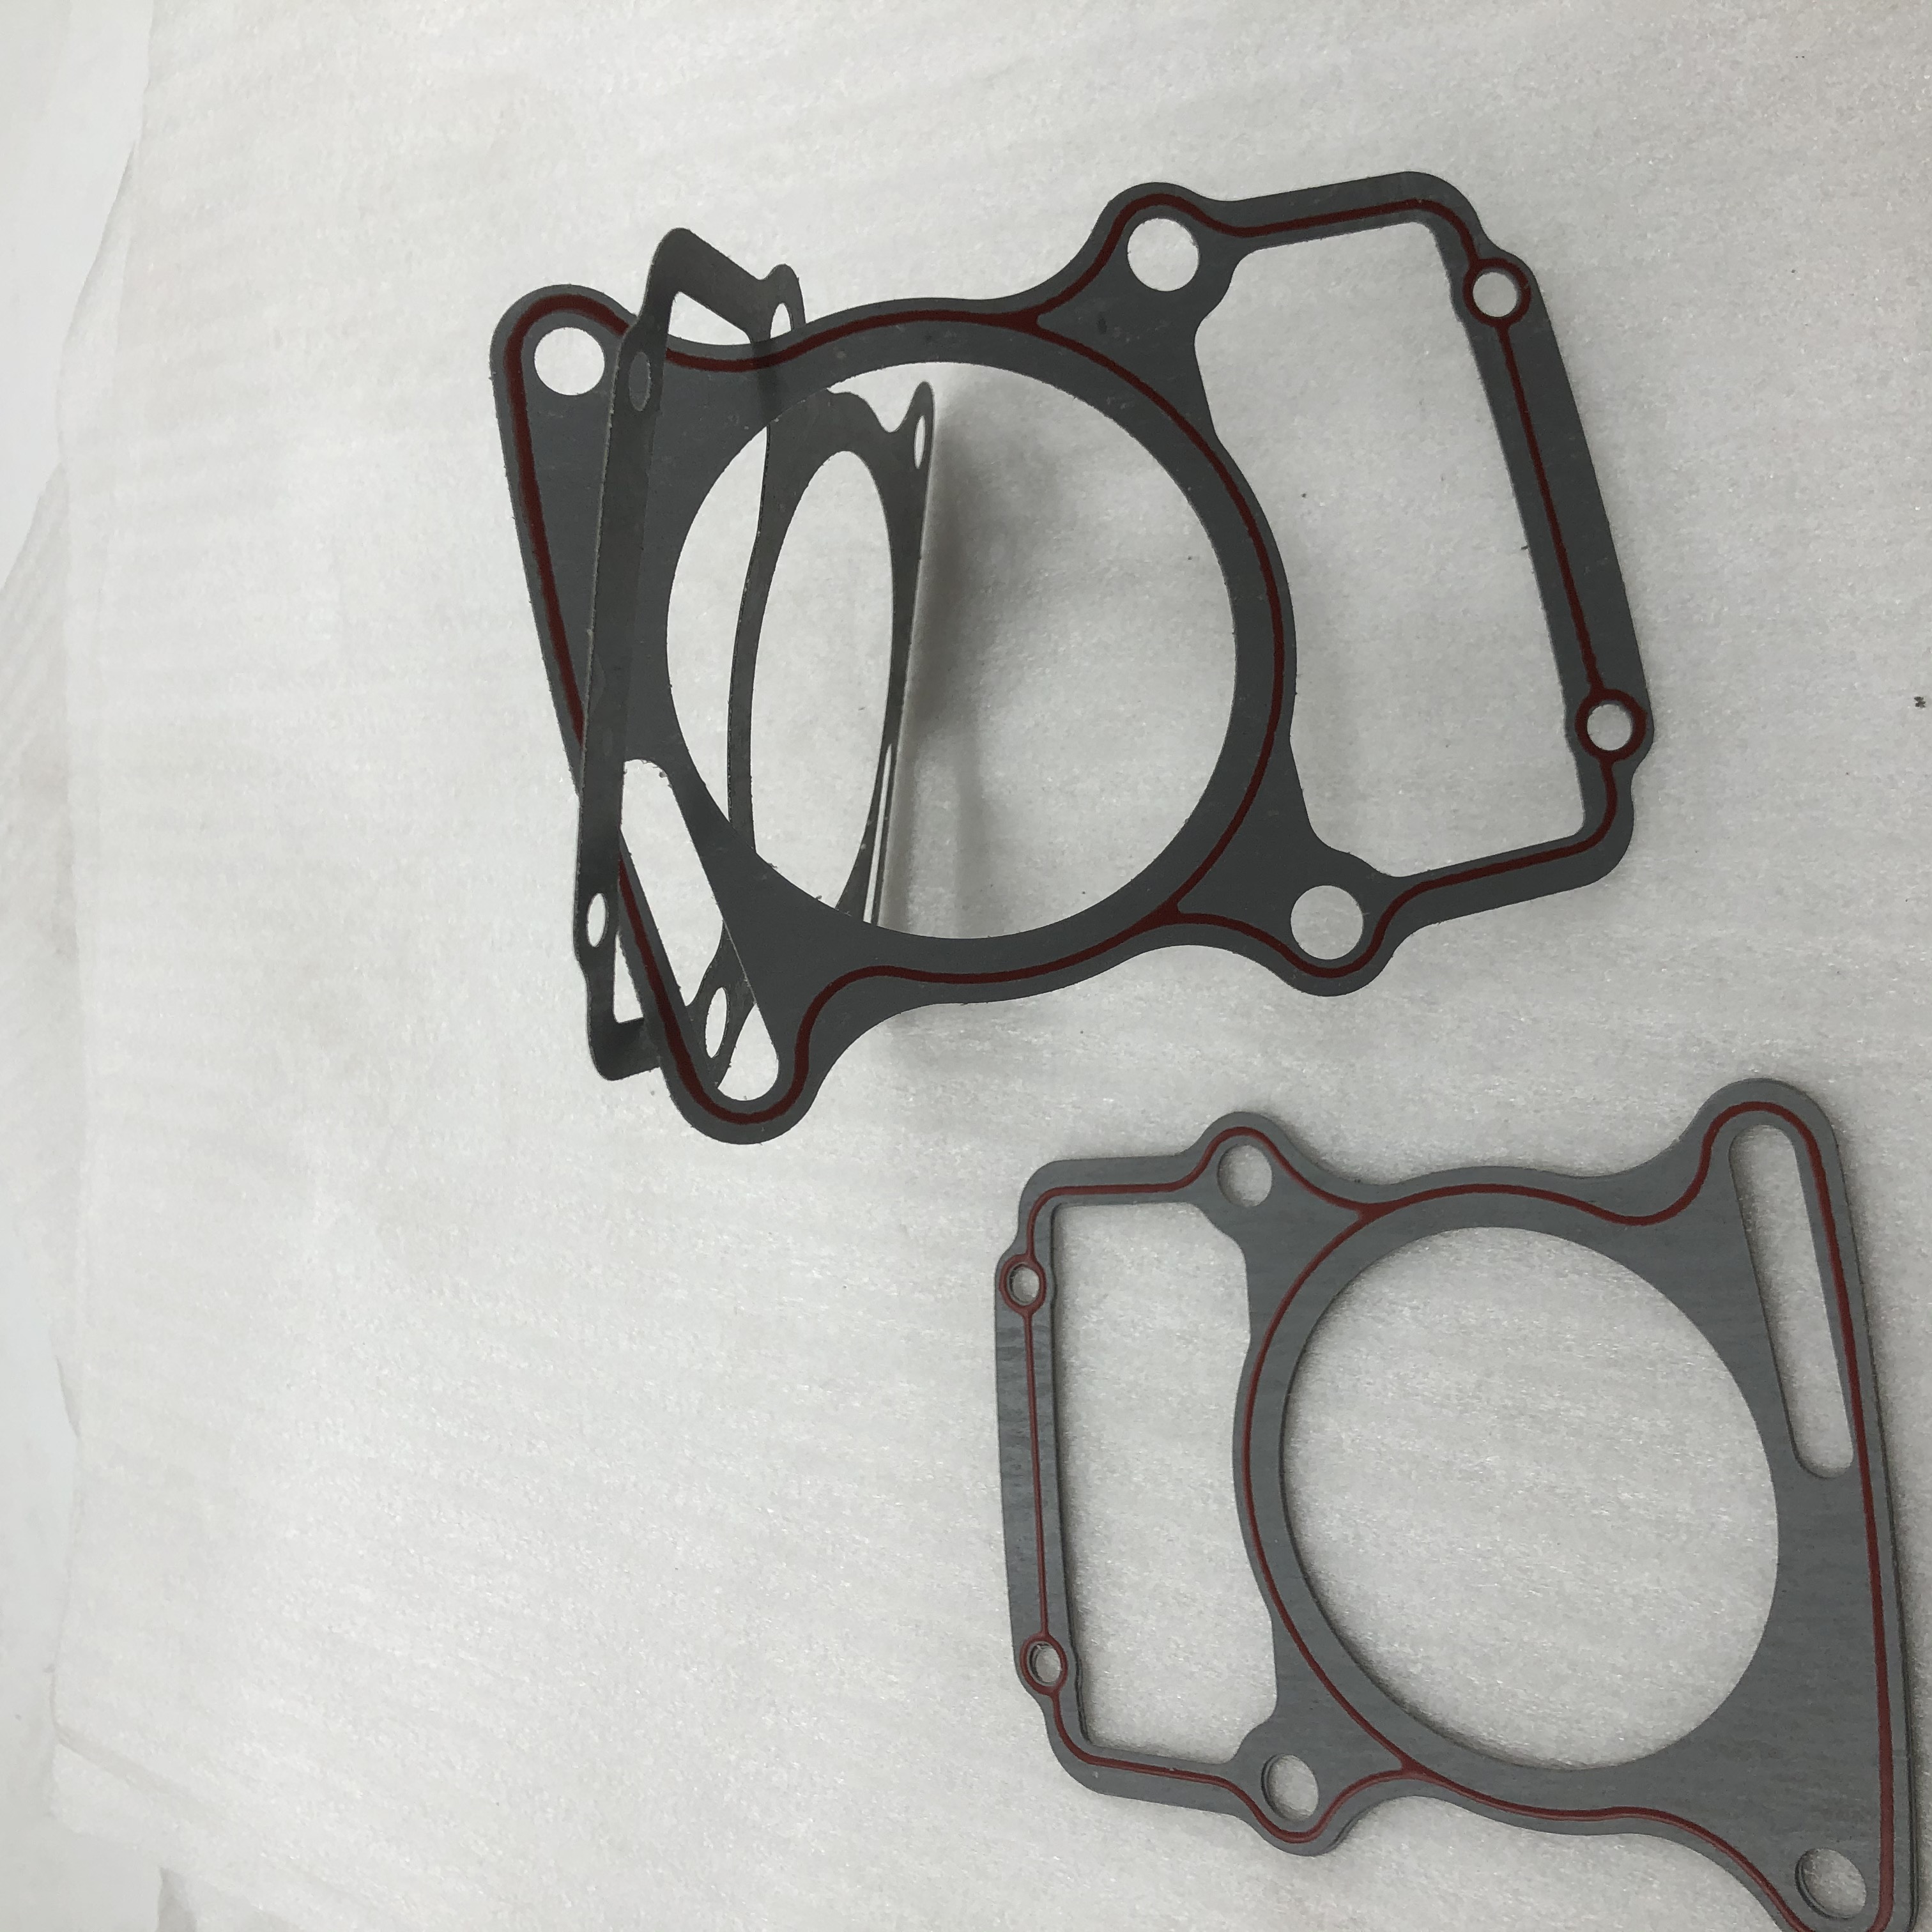 DAYANG high quality factory direct sale SB250 tsunami water-cooled tricycle motorcycle parts  engine cylinder block gasket